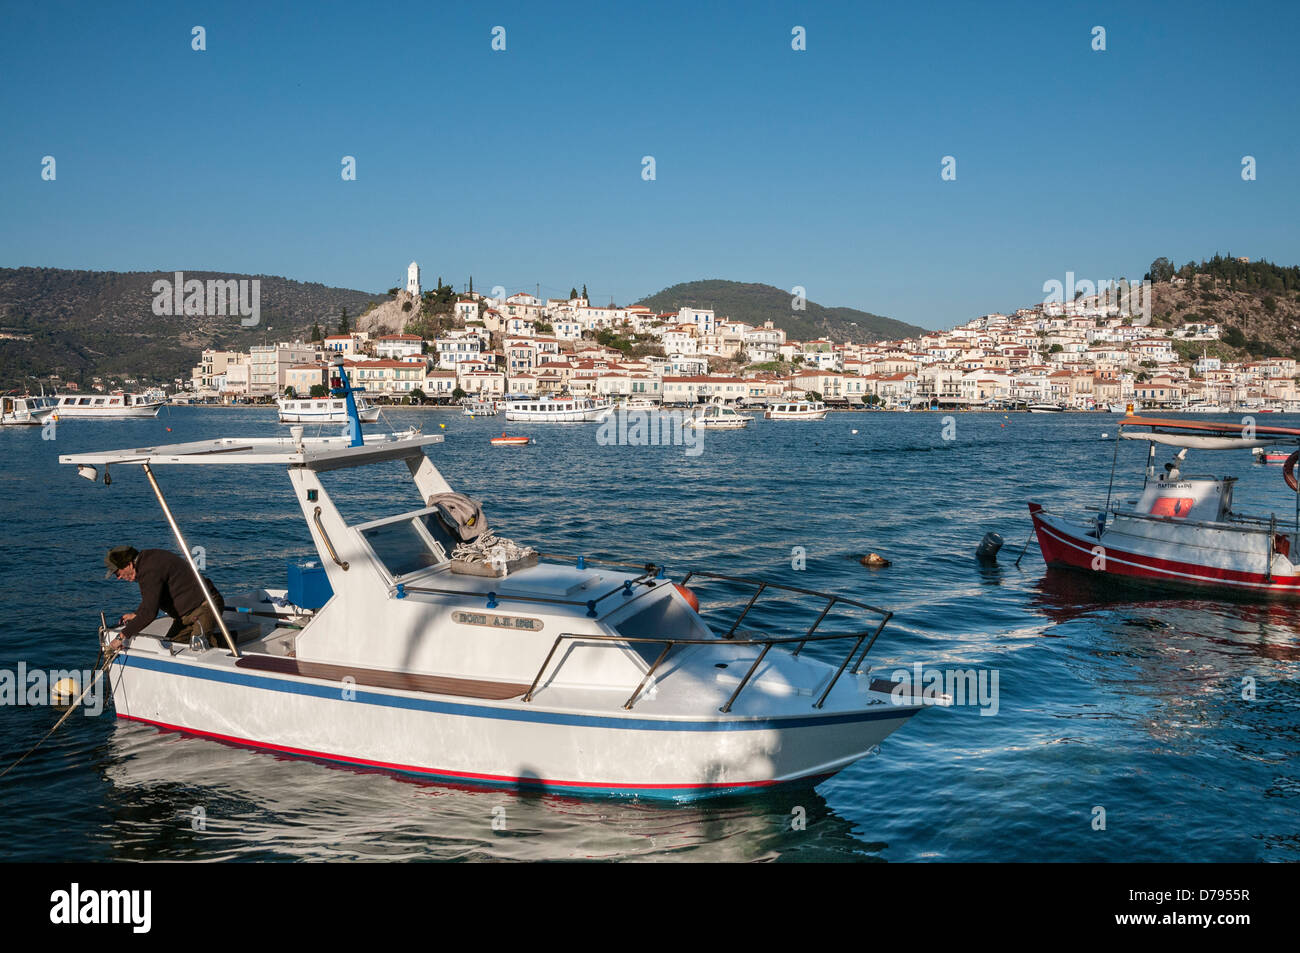 The Island and Town of Poros, seen from the harbour at Galatas, Attica, Peloponnese, Greece. Stock Photo